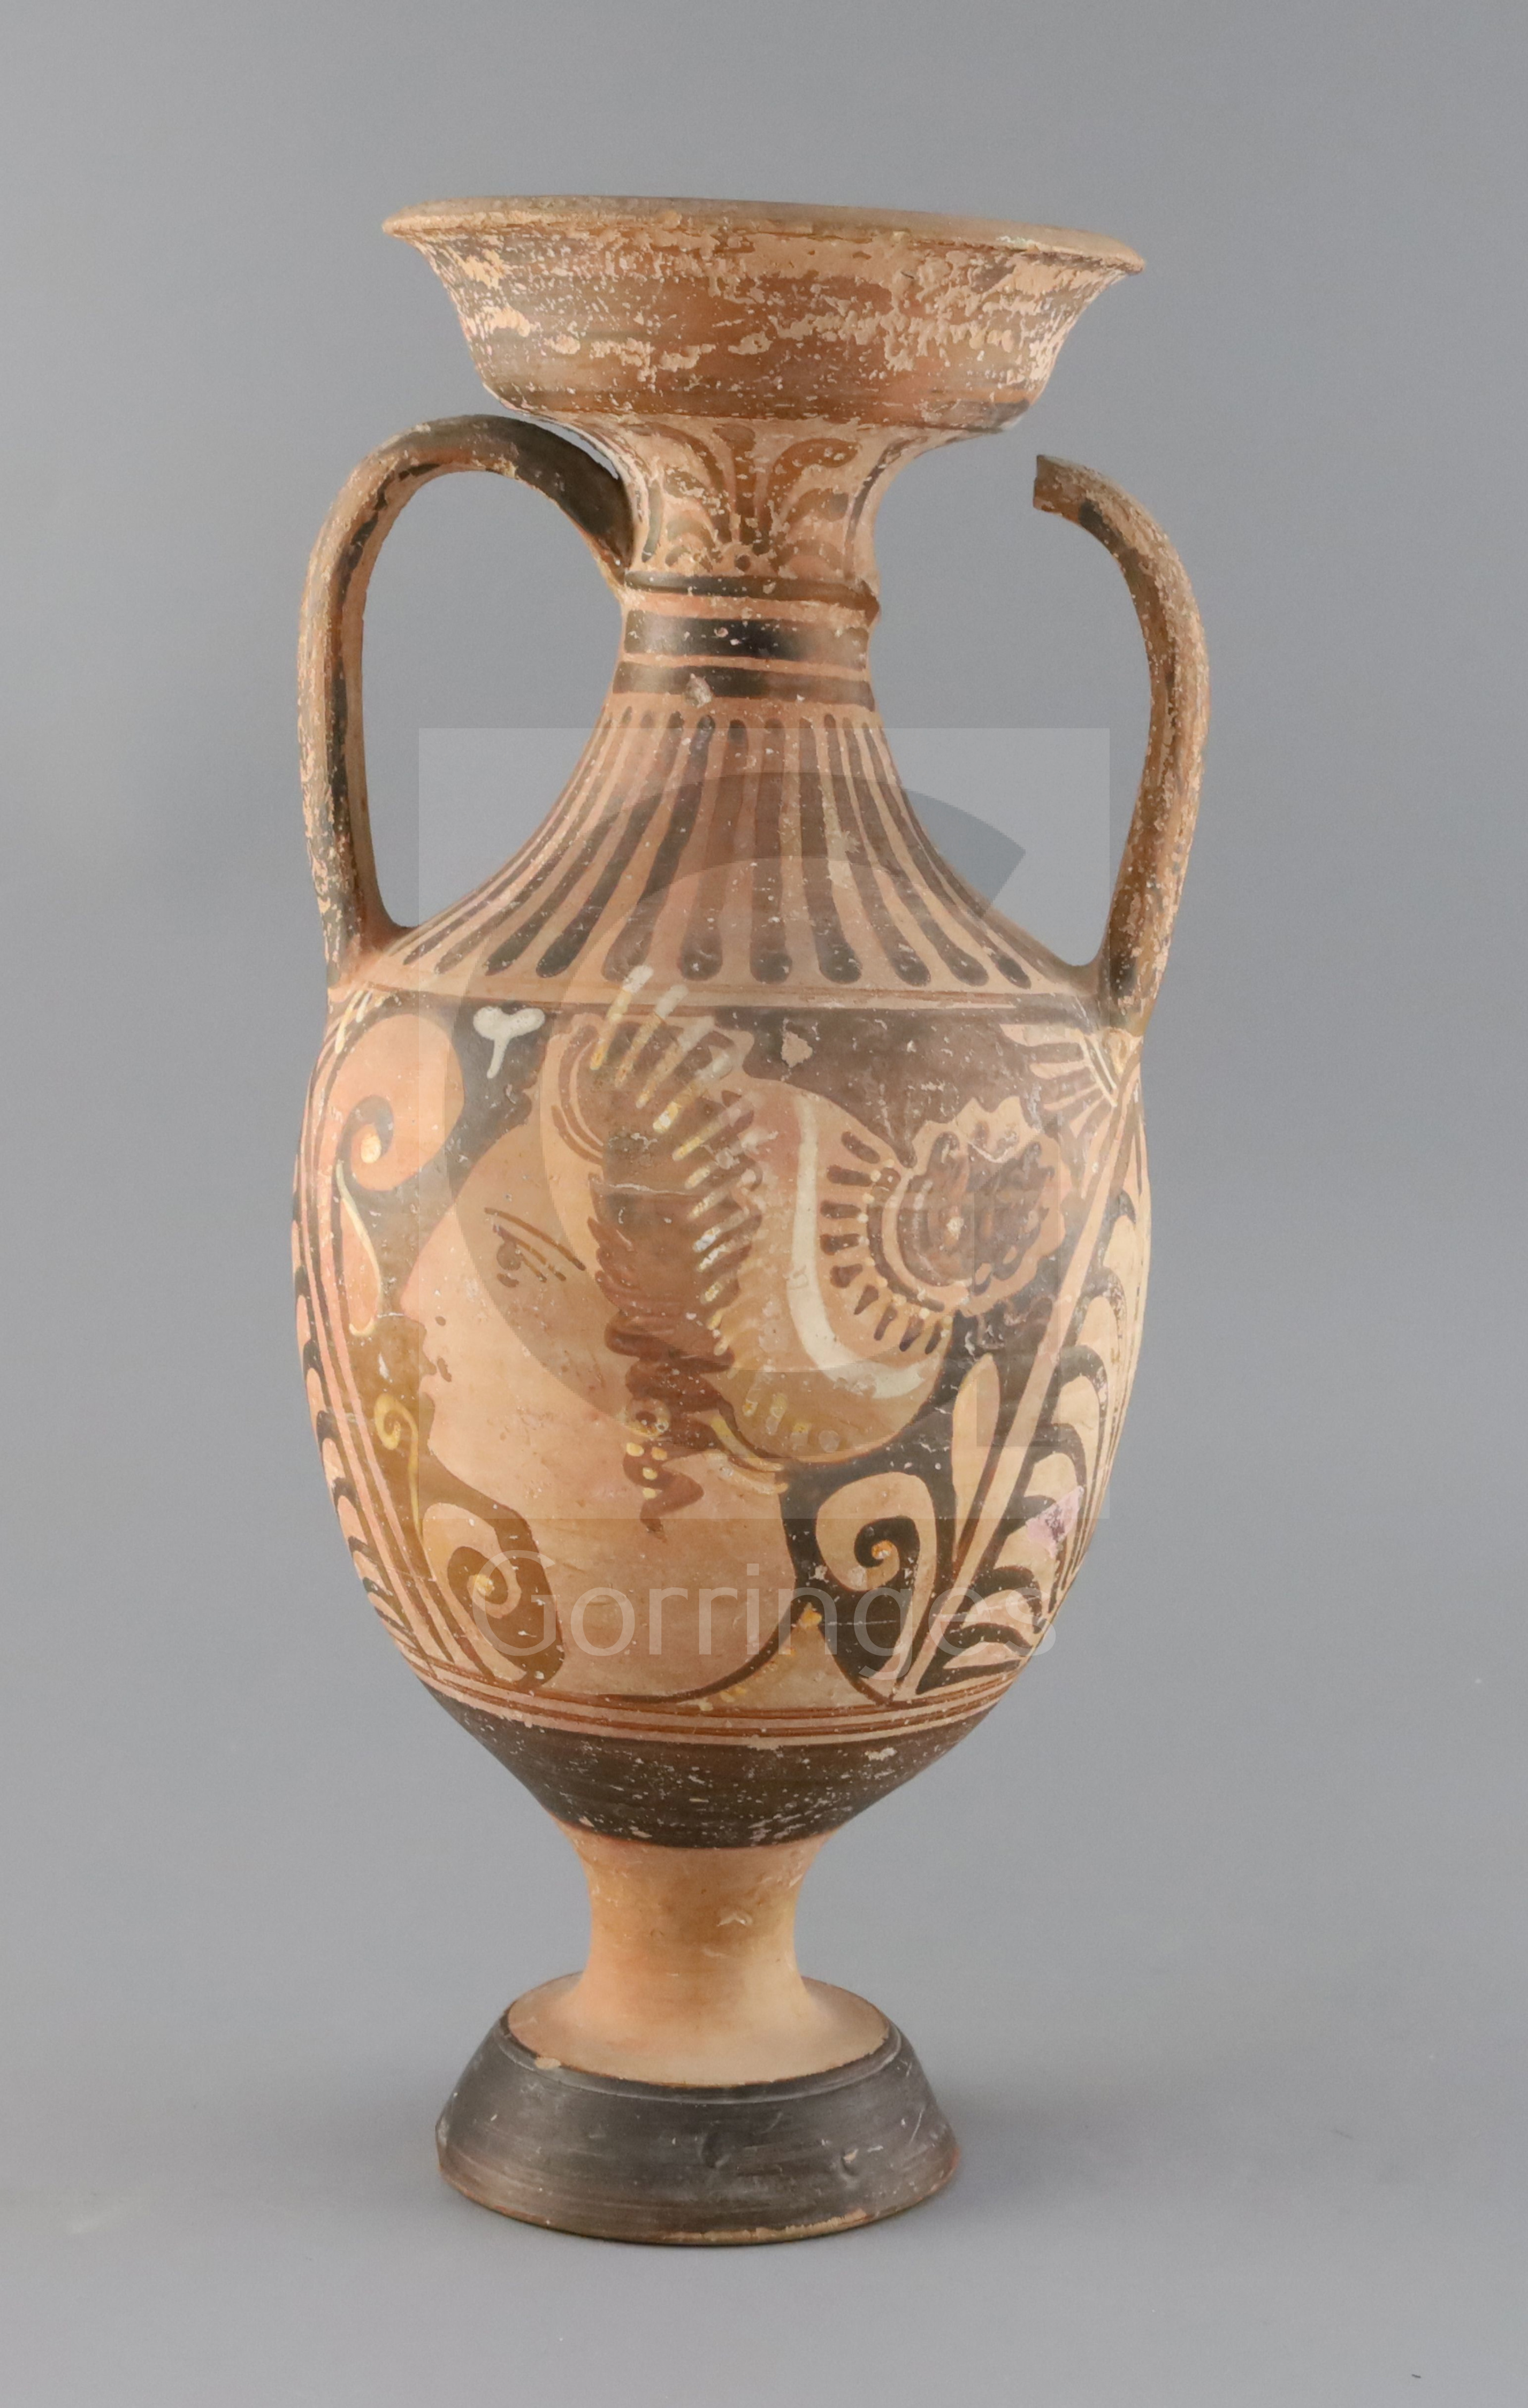 An Apulian red-figure pottery amphora, Southern Italy, 4th century B.C., part of one handle lacking - Image 2 of 2